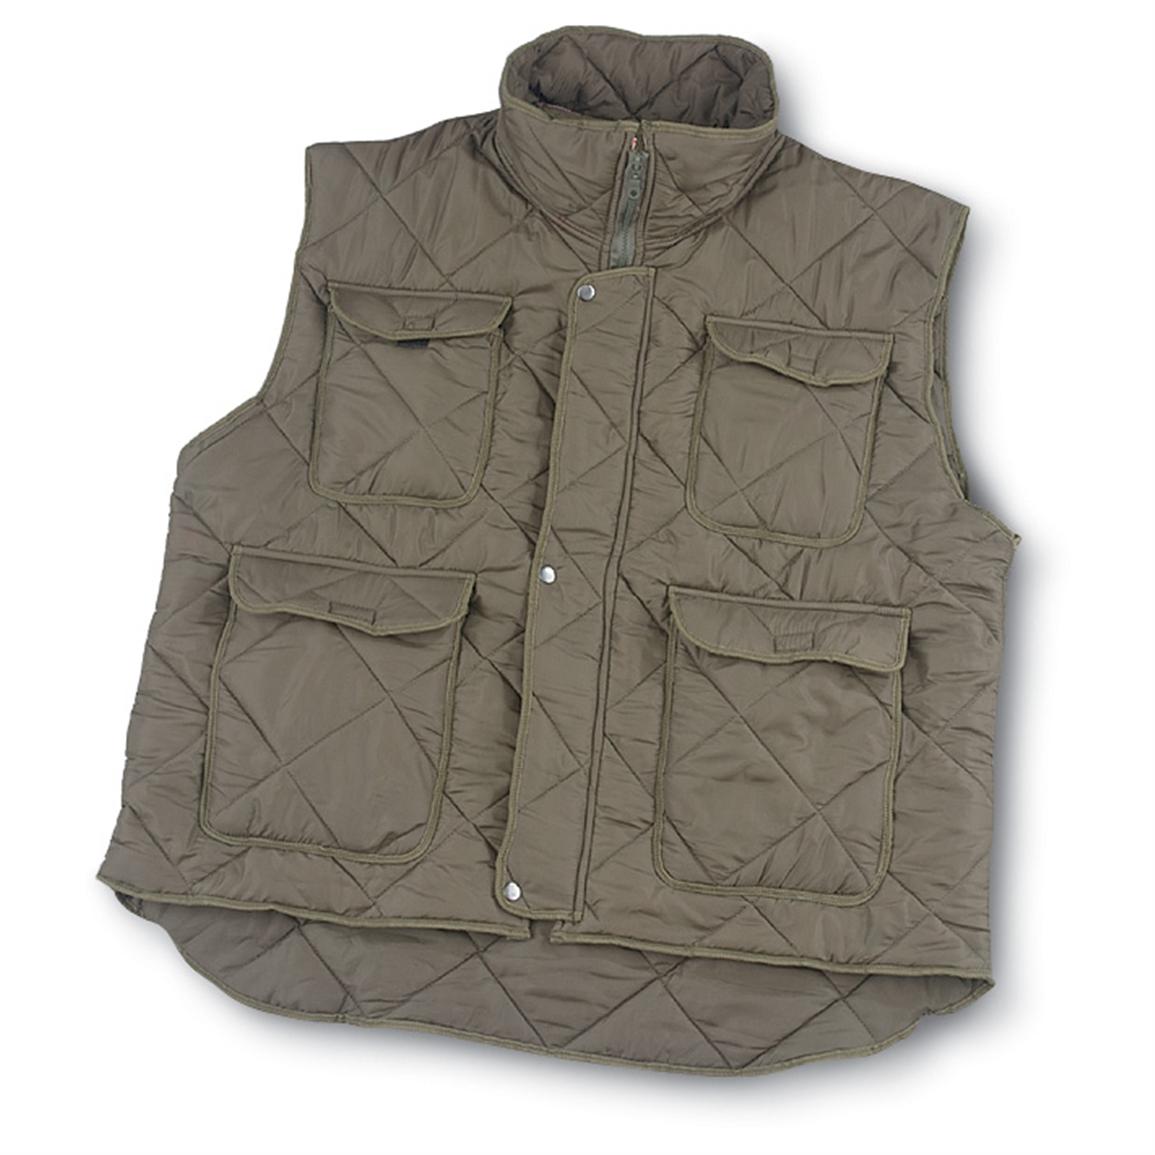 Swiss Military-issue Insulated Vest - 101766, at Sportsman's Guide